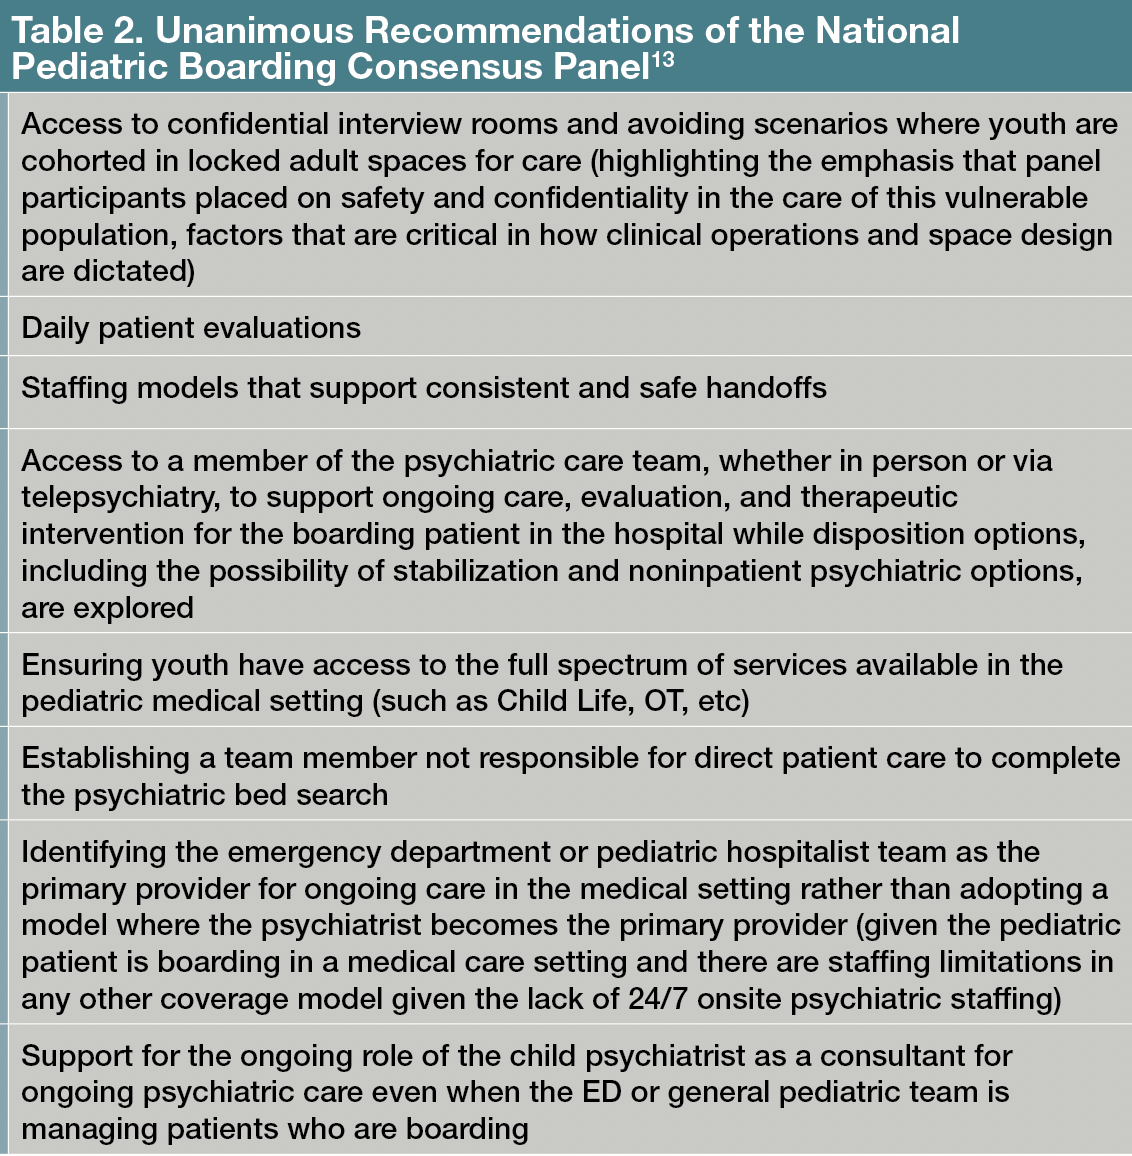 Table 2. Unanimous Recommendations of the National Pediatric Boarding Consensus Panel